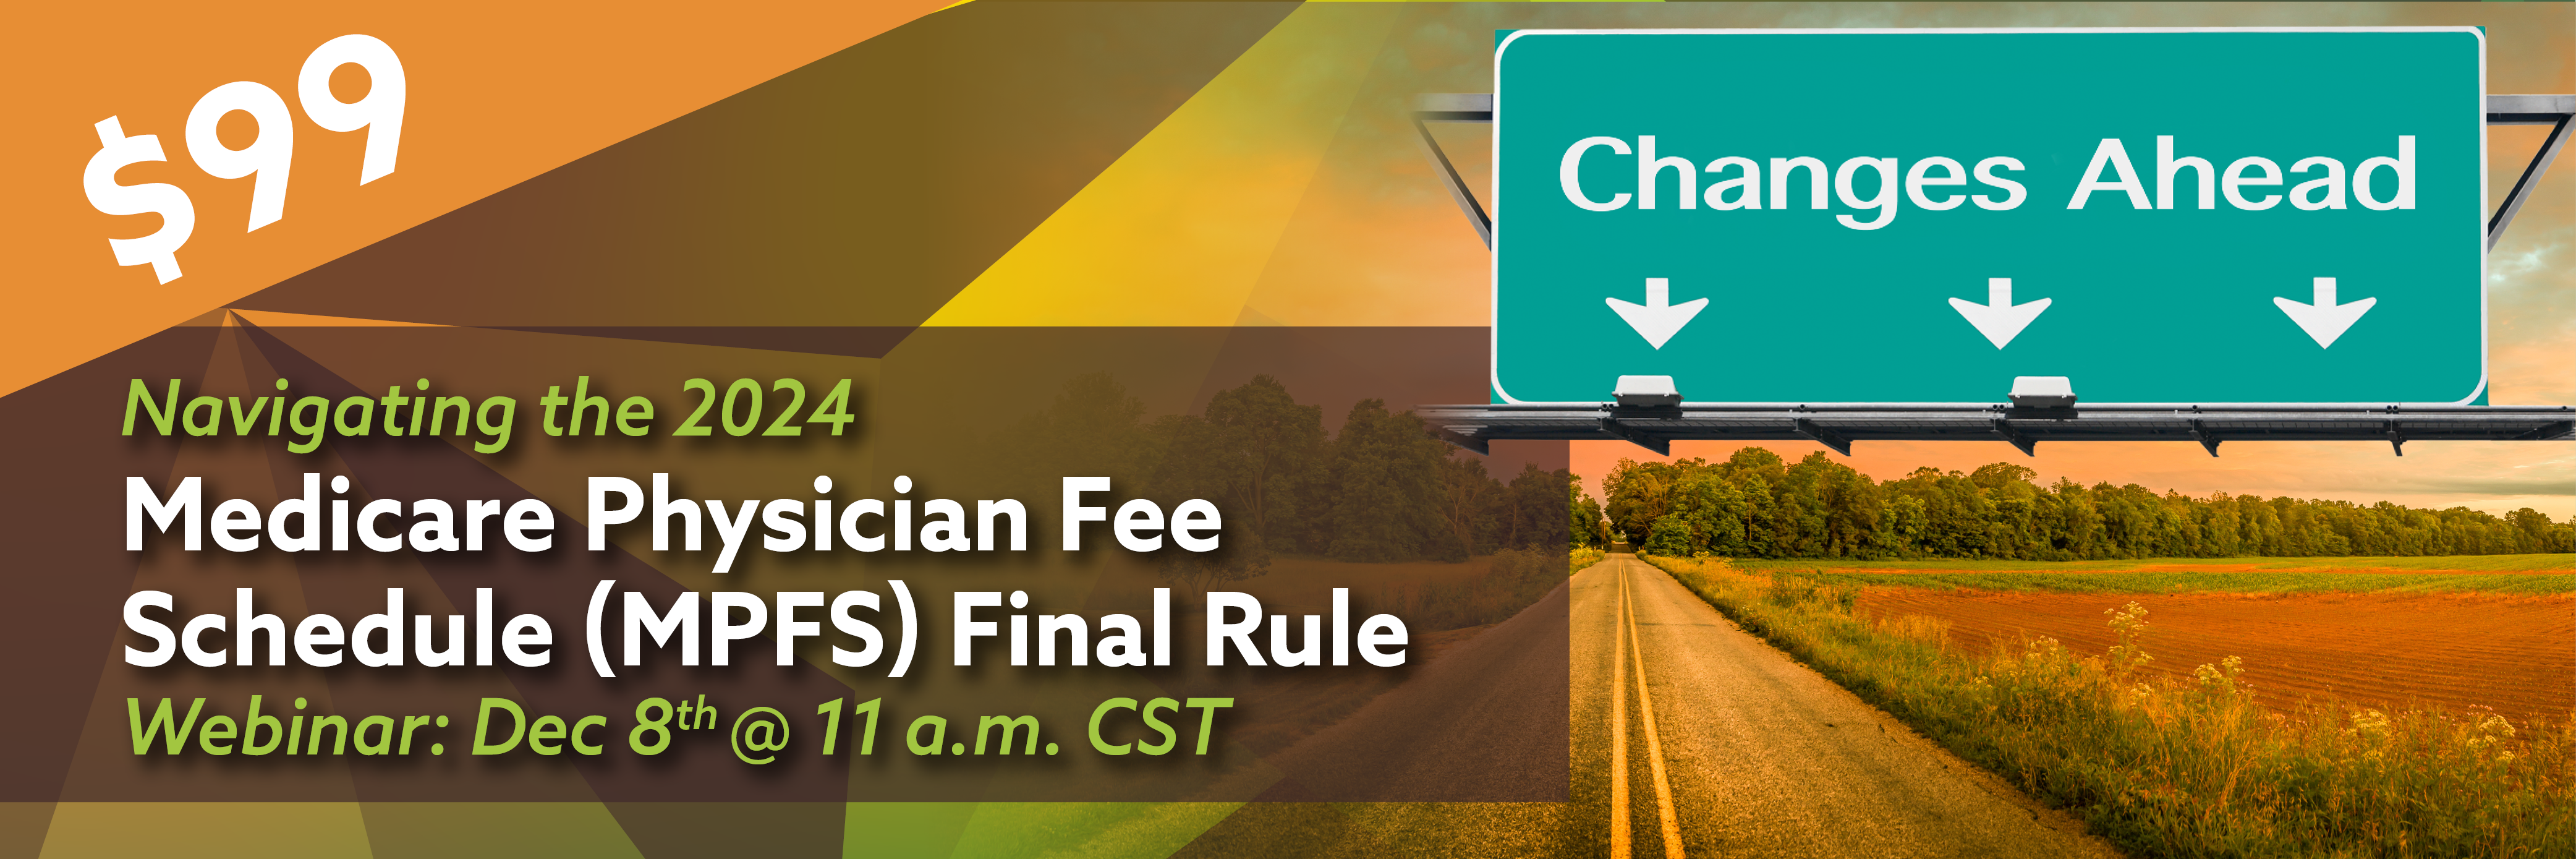 Navigating the 2024 Medicare Physician Fee Schedule (MPFS) Final Rule, Webinar: Dec 8th @ 11 a.m. CST, $99